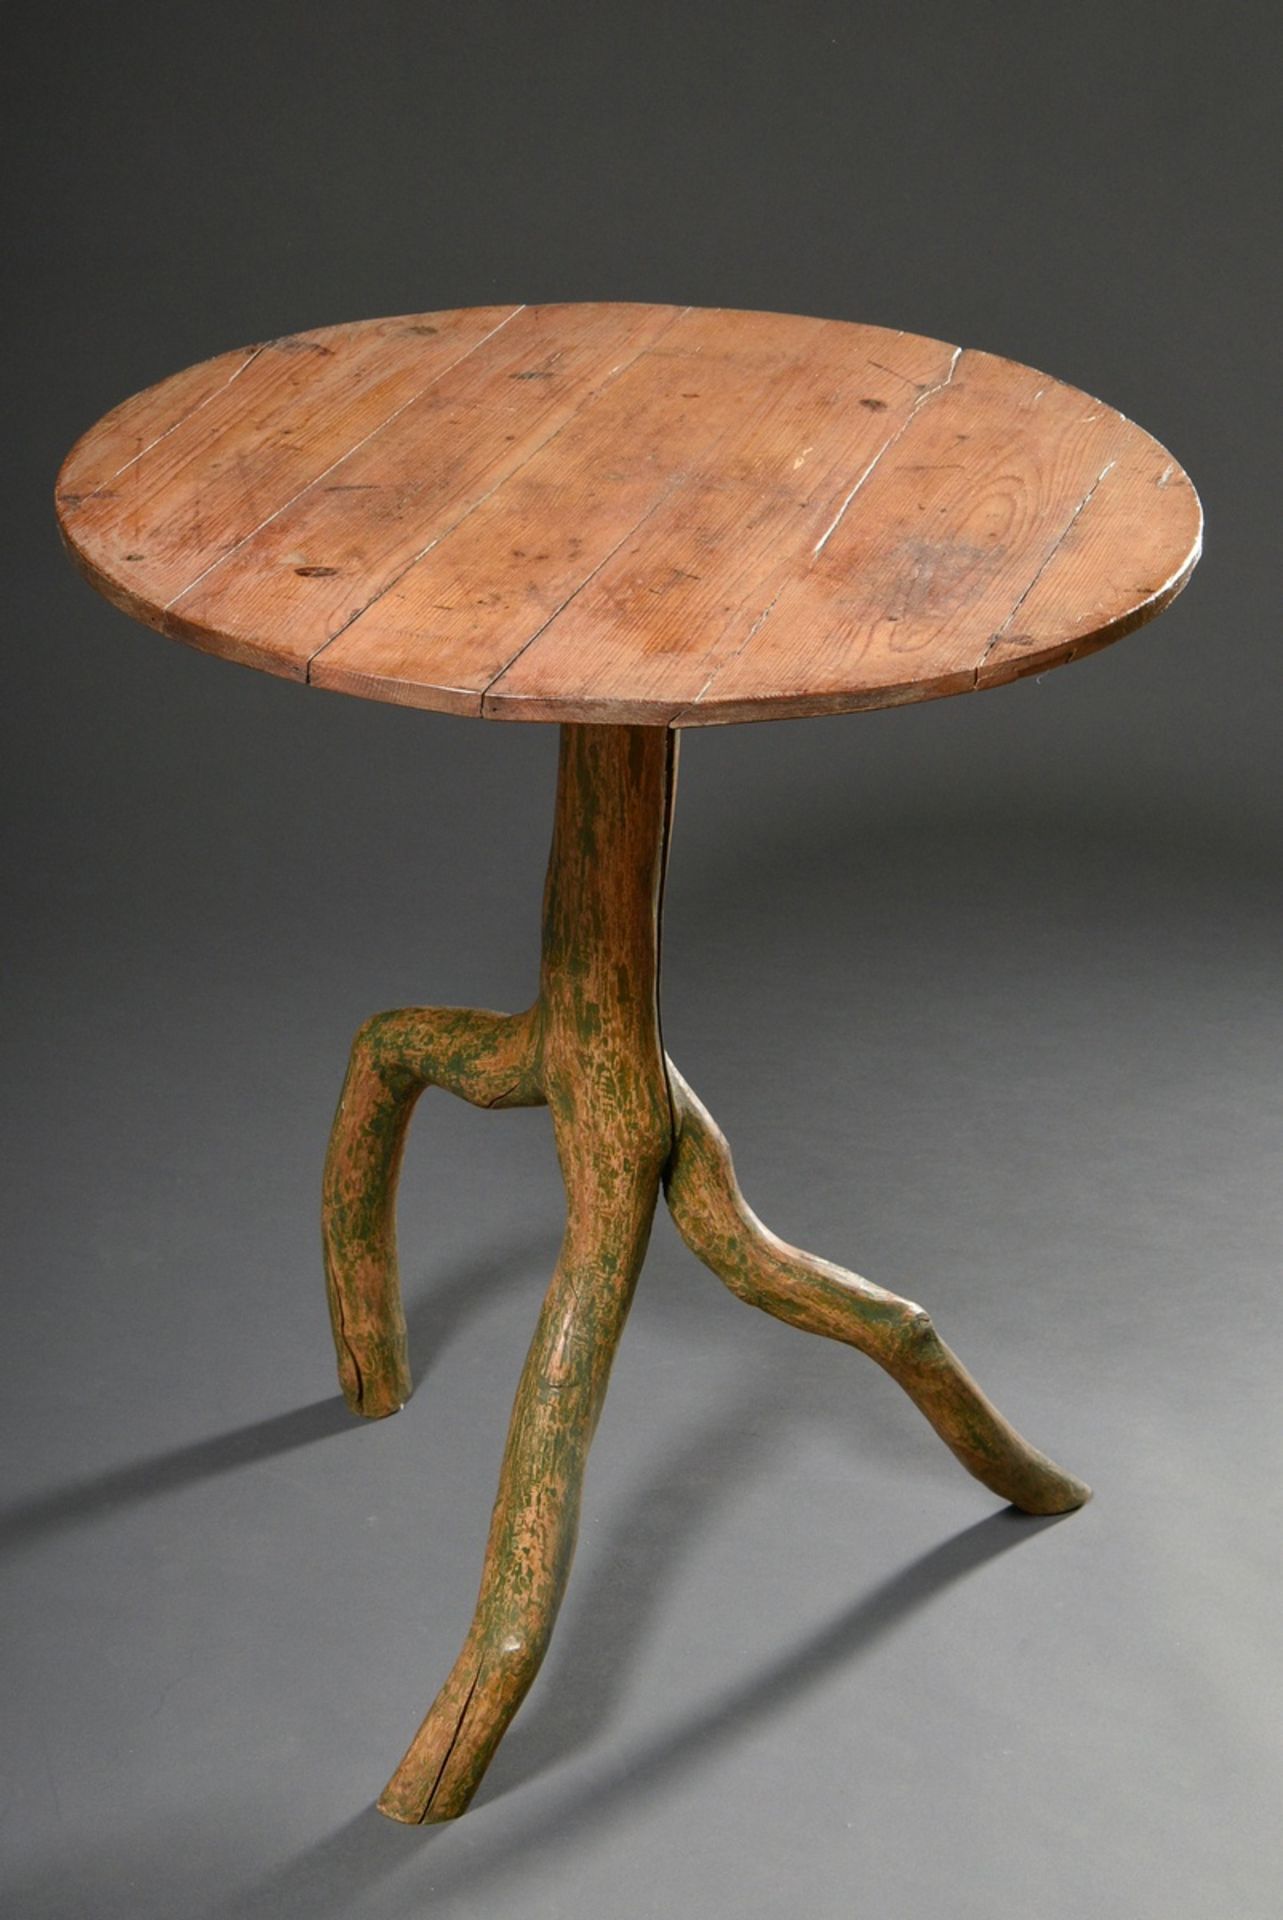 Rural side table with round top on three-legged branch base, green remnants, Sweden 19th century, h